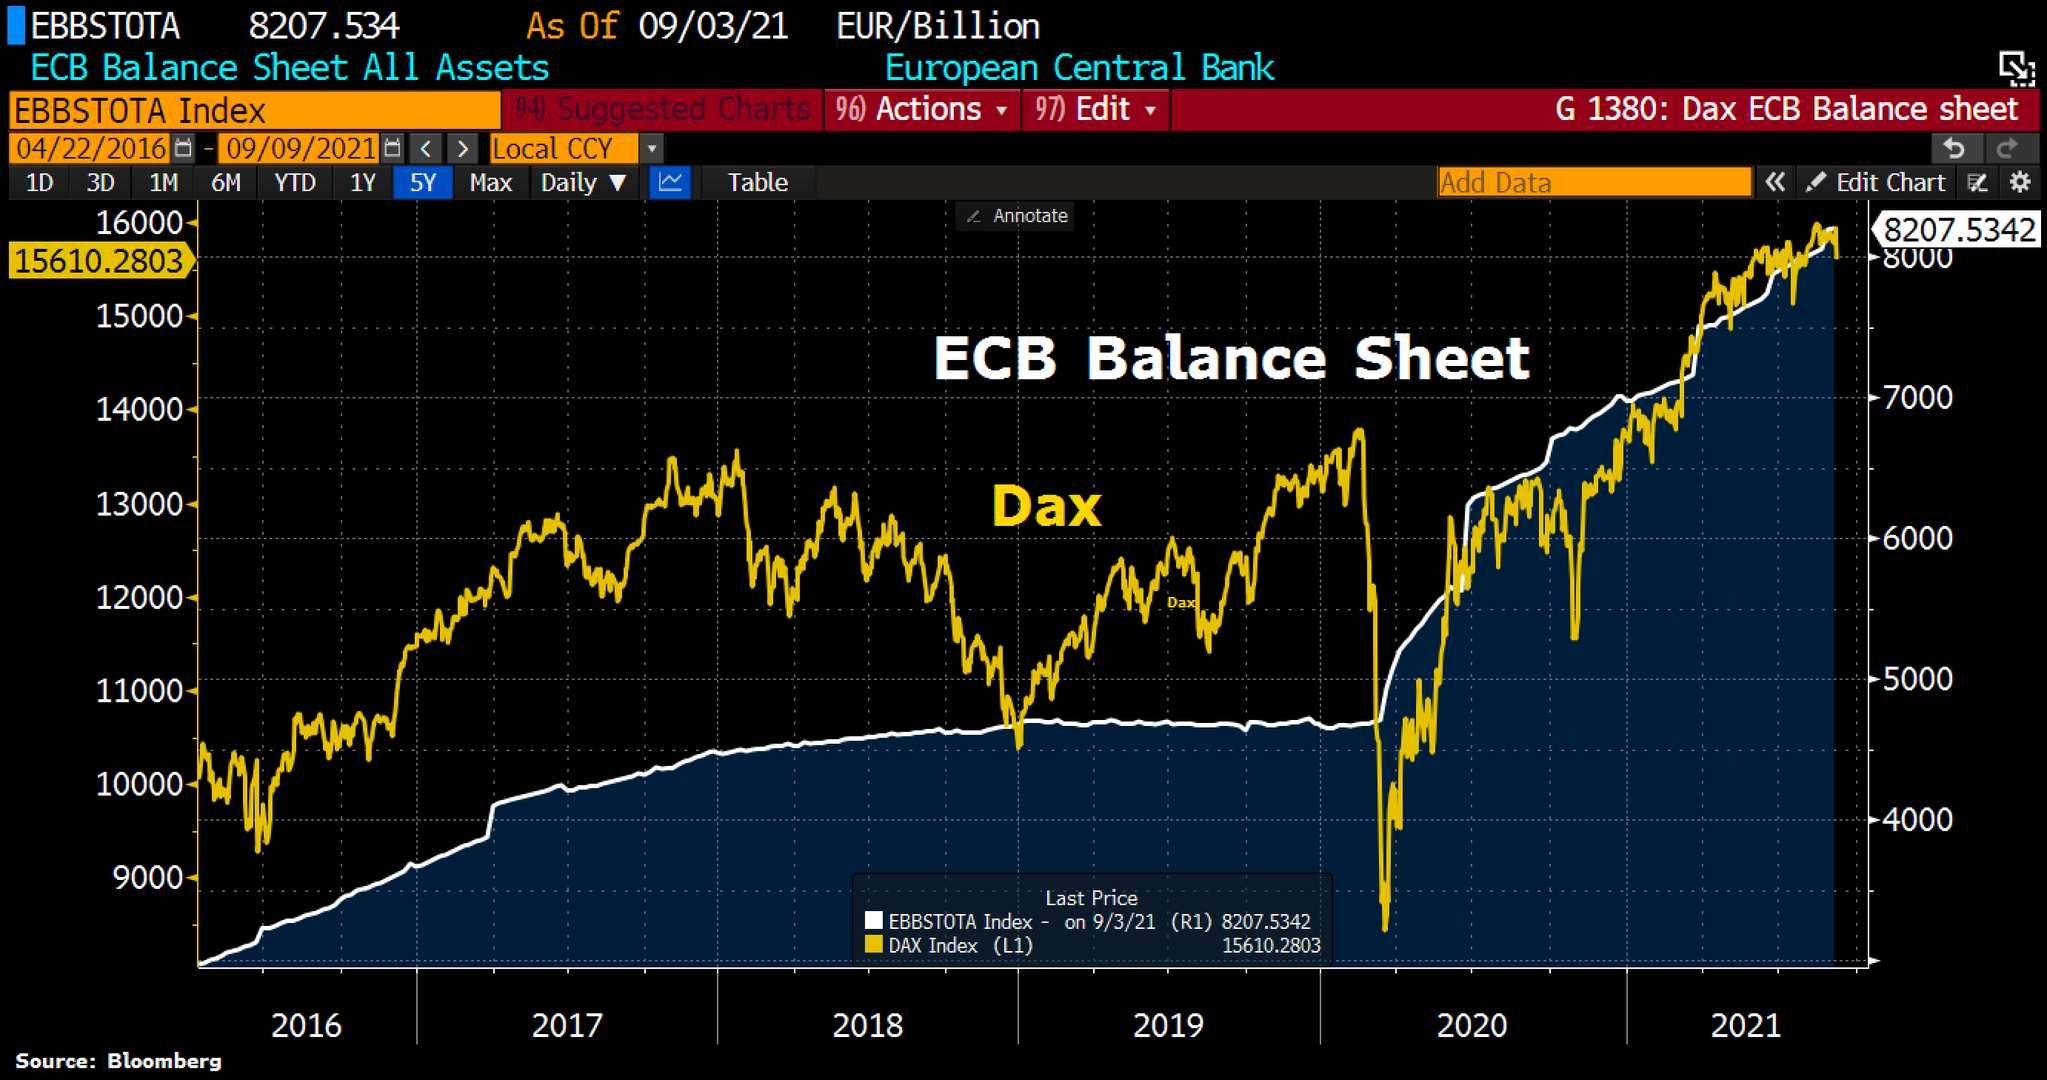 What will ECB tapering mean for the DAX?